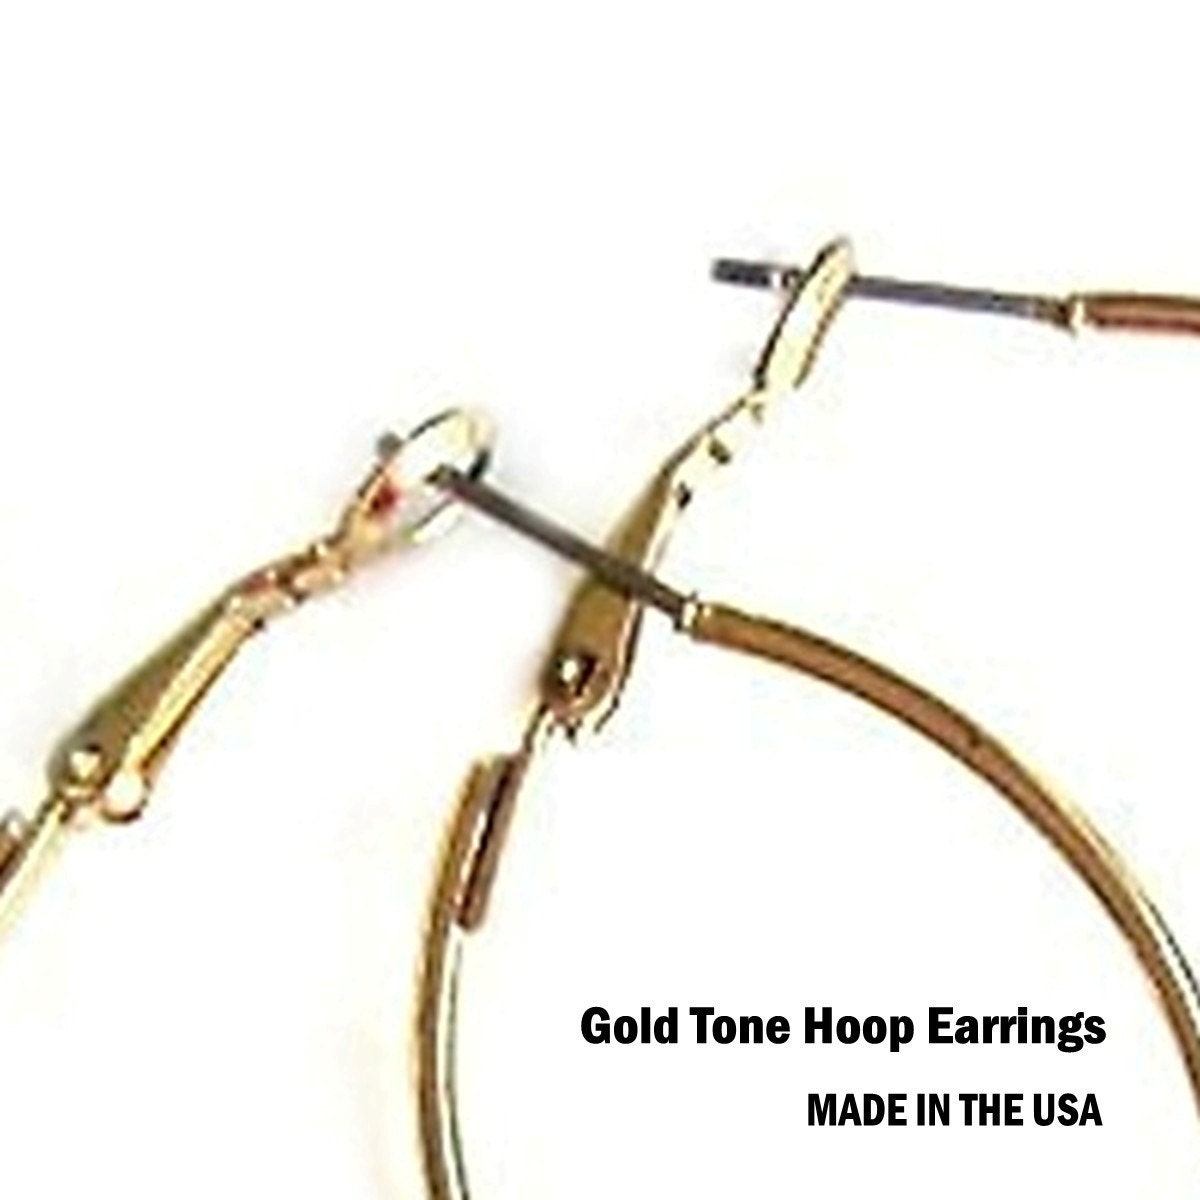 ON SALE Summer Jewelry Gold Hoop Earrings With A Rainbow of Beads, 1.5 inches (3.81 cm), Retro Hippie Chic, Hoop It Up